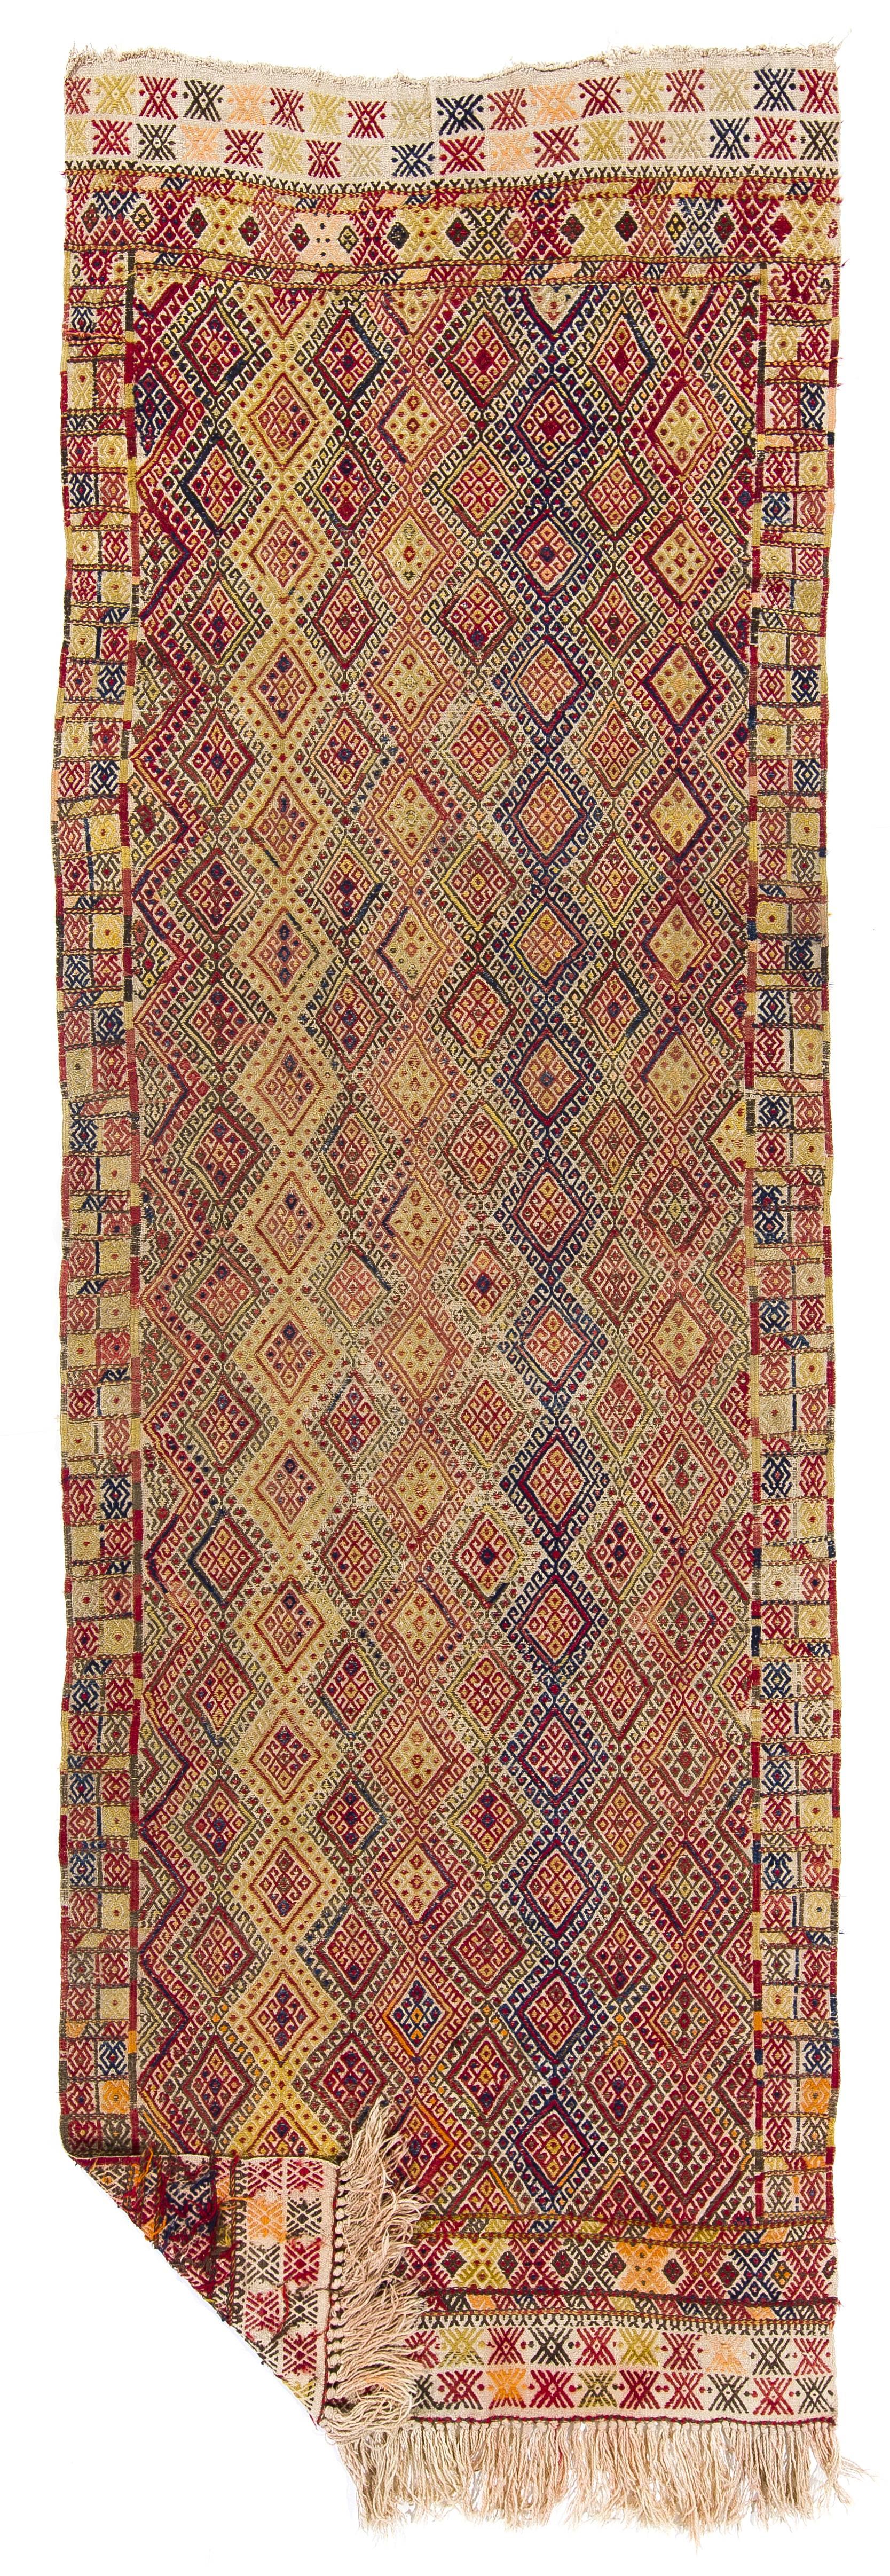 This attractive flat-weave runner rug is handwoven in fine local wool to create a sturdy floor covering featuring an all-over burdock design in soft, warm shades of dark and light moss green, terra cotta red and navy blue. 

Kilims of this type,